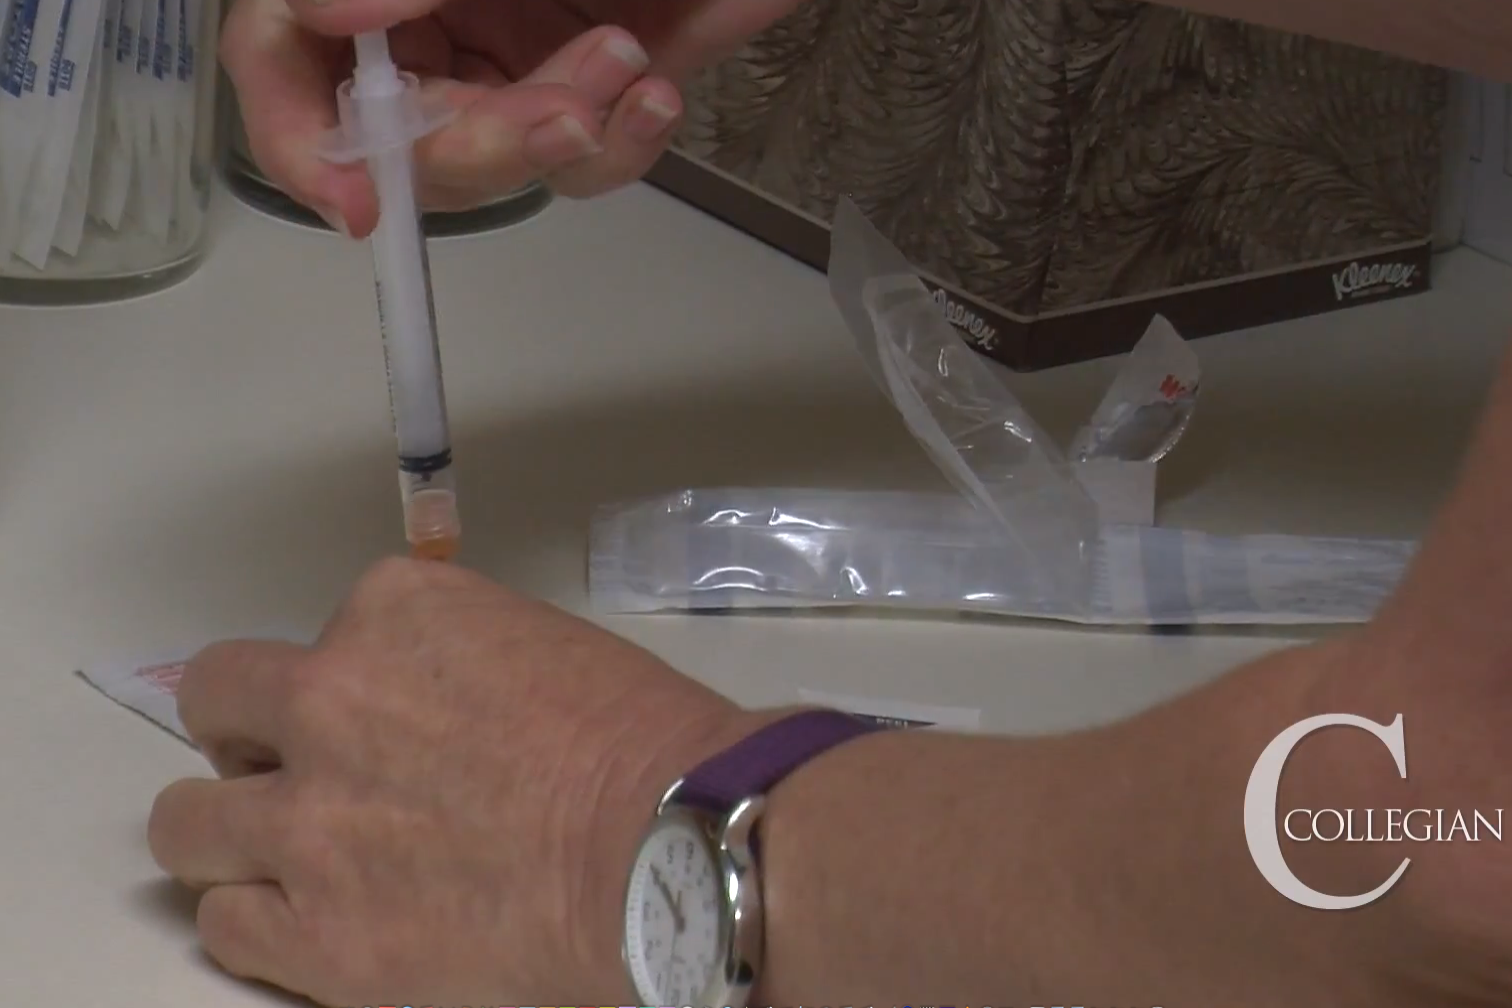 Free flu shots will be available to students